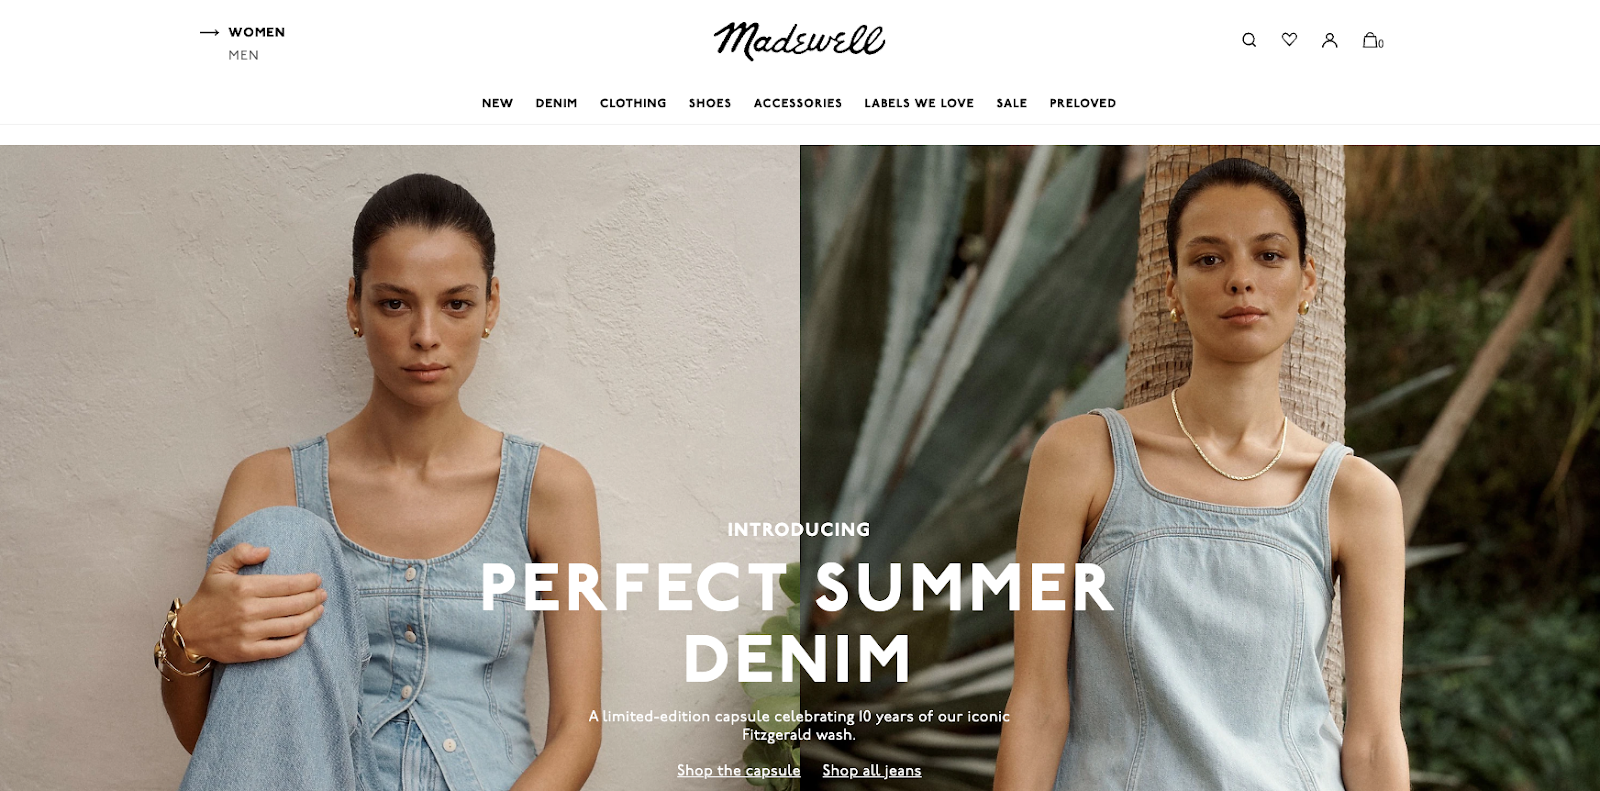 navigation bar example from madewell